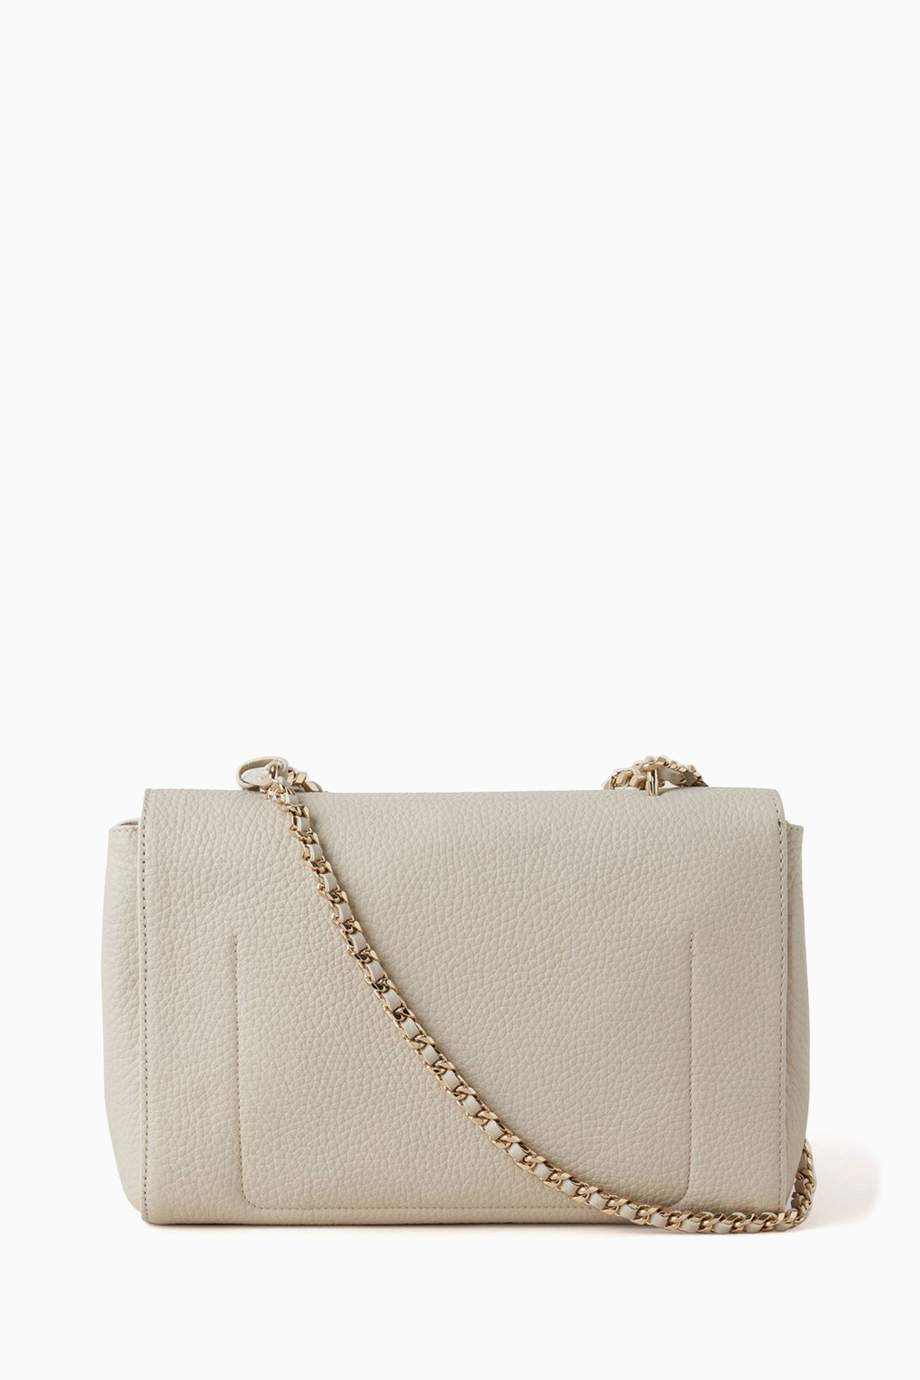 Shop Mulberry White Medium Lily Top Handle Bag in Heavy Grain Leather ...